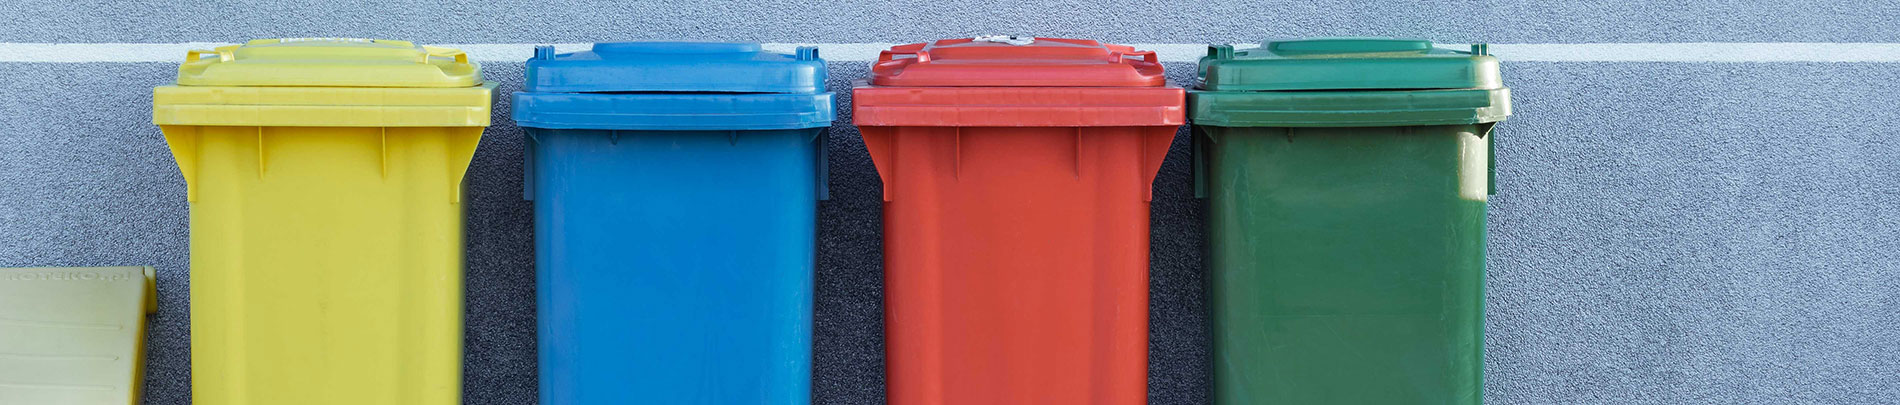 A series of colourful garbage and recycling bins lined up against a wall.